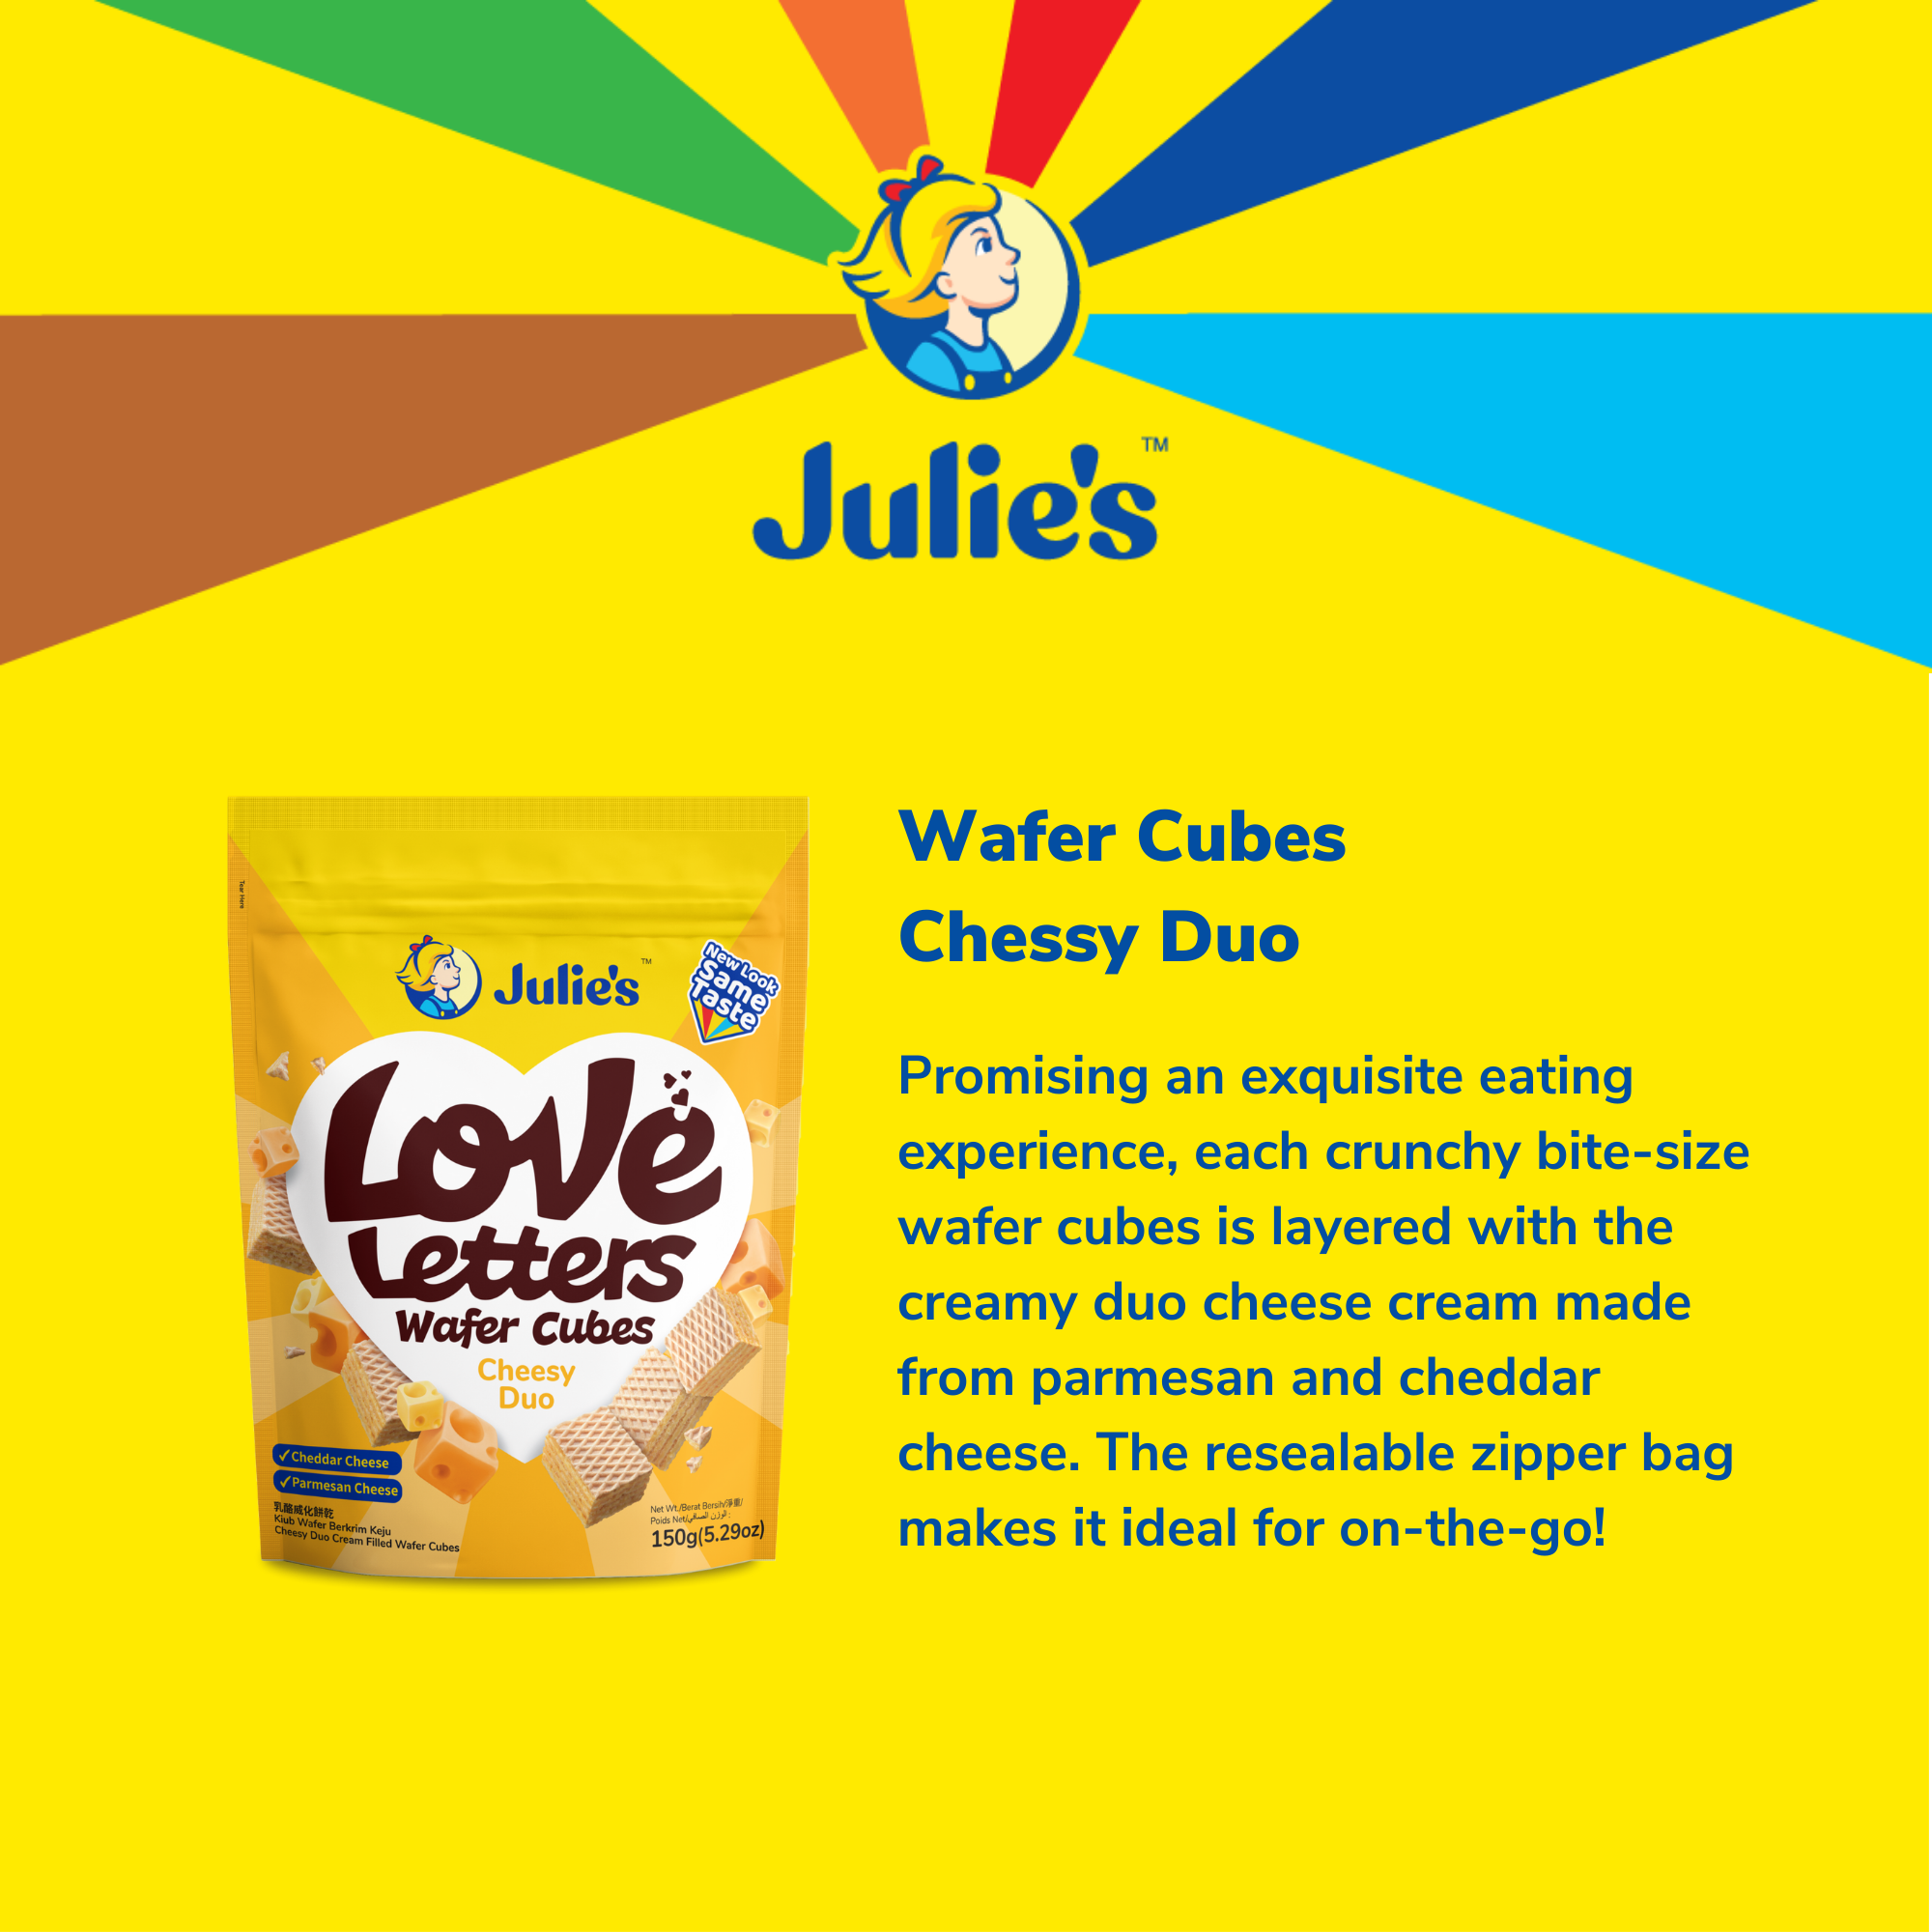 Julie's Love Letters Wafer Cubes Cheesy Duo 150g x 2 packs